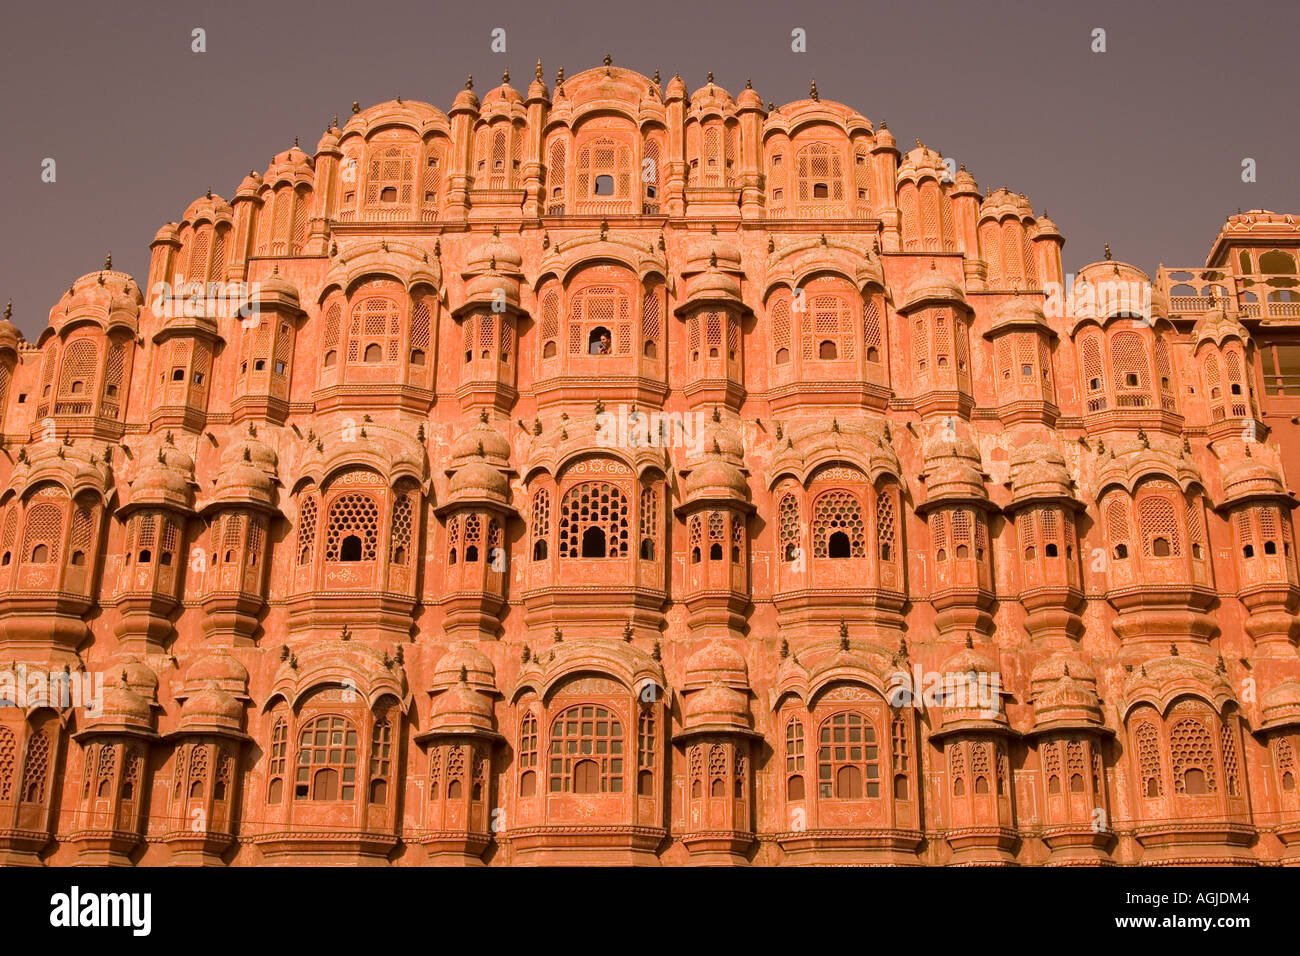 asia india palace of the winds in jaipur rajasthan Stock Photo